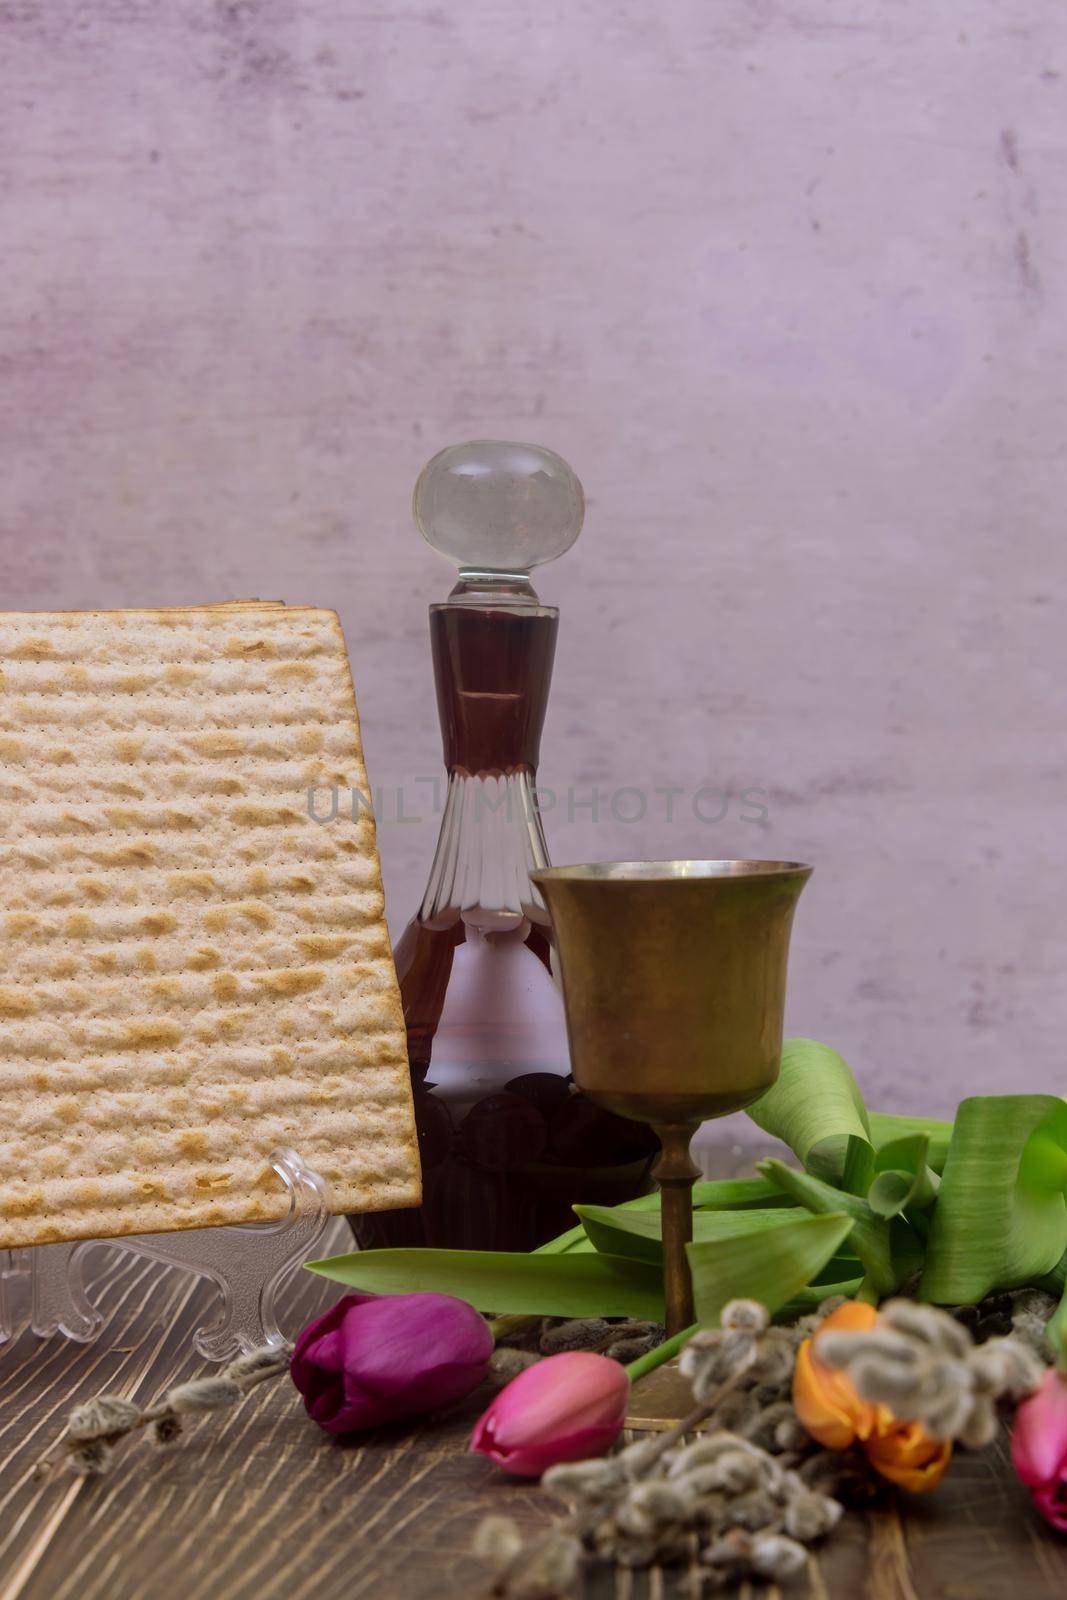 Jewish Passover holiday on matzah bread with kosher kiddush and flowers. by ungvar